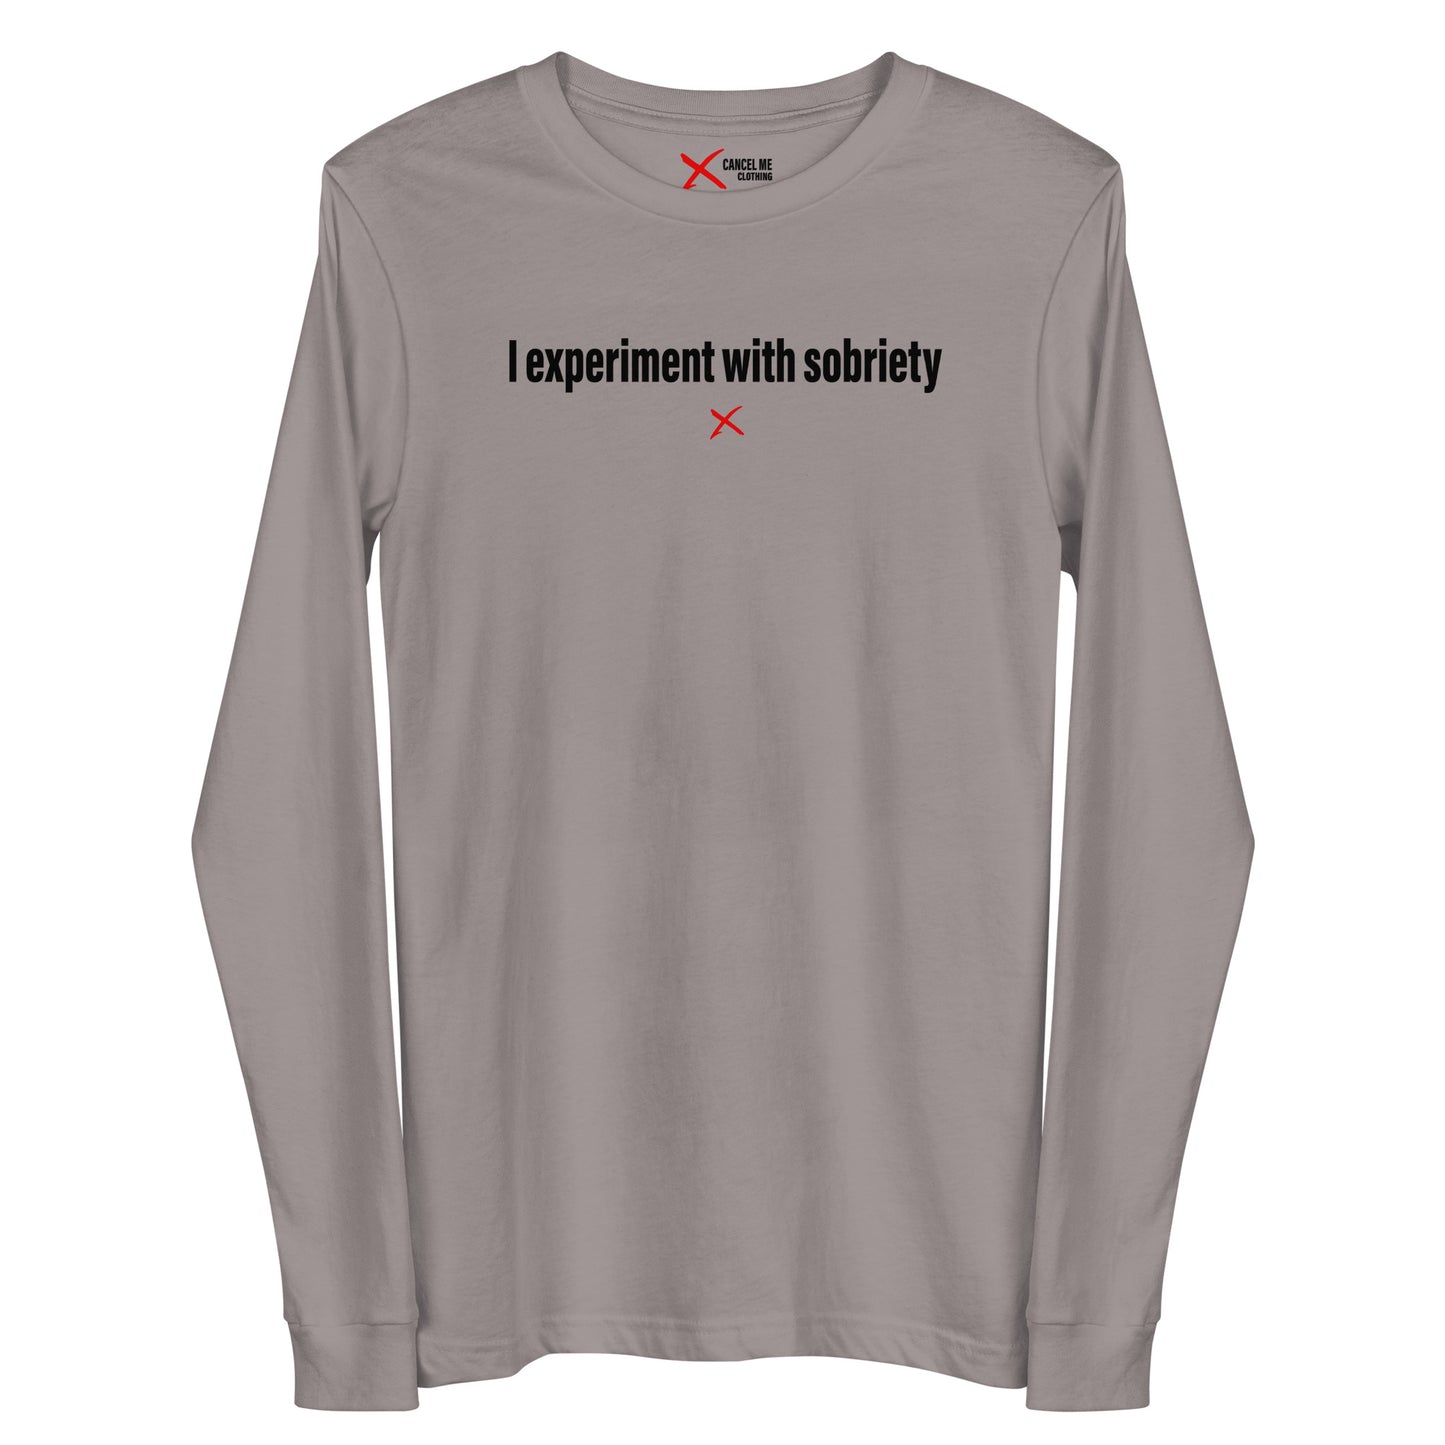 I experiment with sobriety - Longsleeve